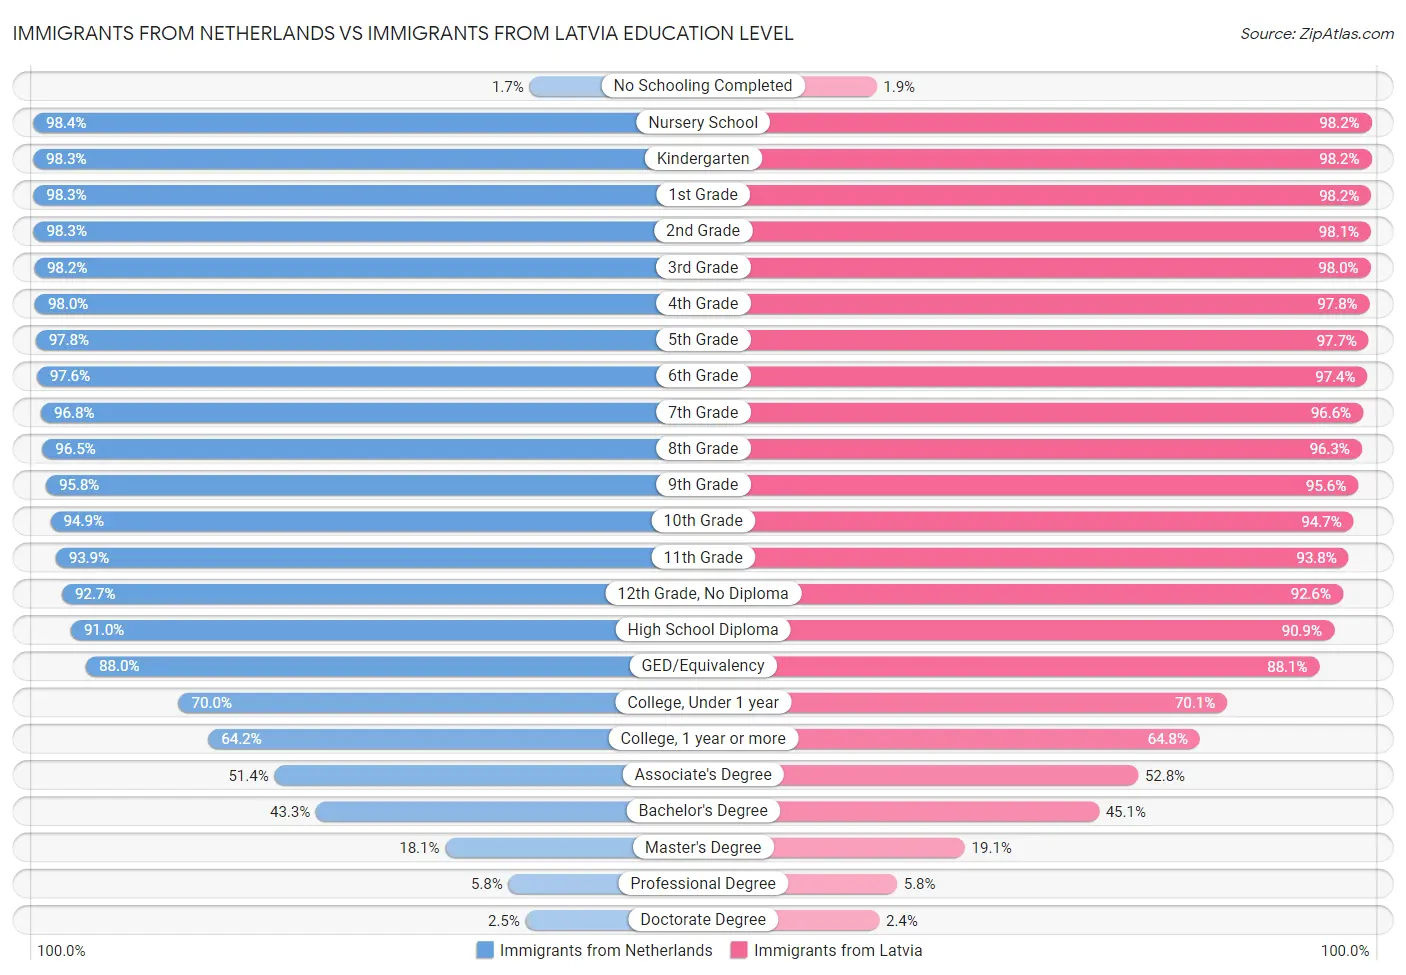 Immigrants from Netherlands vs Immigrants from Latvia Education Level